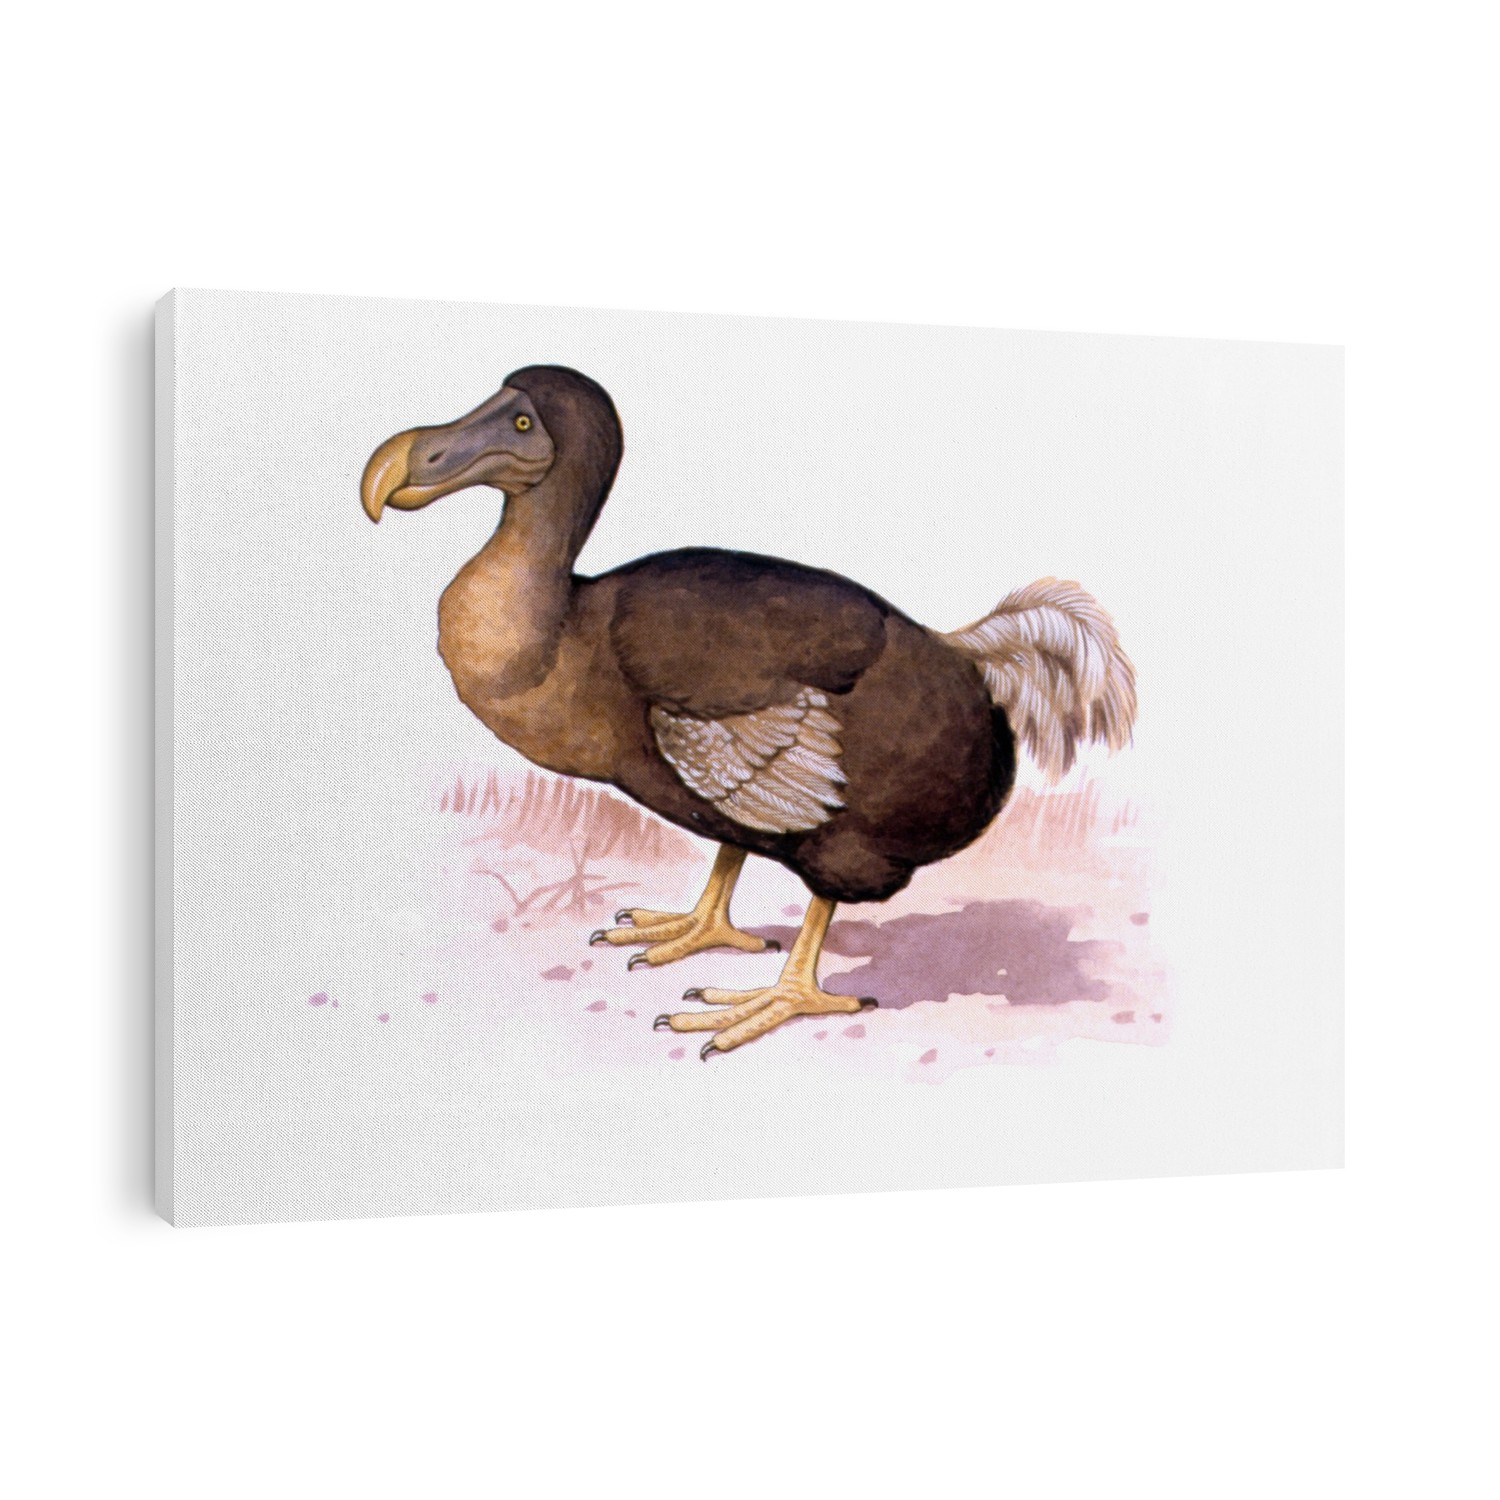 Dodo (Raphus cucullatus). Computer illustration of a dodo. The dodo was a heavily-built flightless bird that was native to the island of Mauritius in the Indian Ocean. It became extinct around 1681 following the arrival of humans. Its appearance is known only from contemporary sketches and artworks, as no intact skins survive.